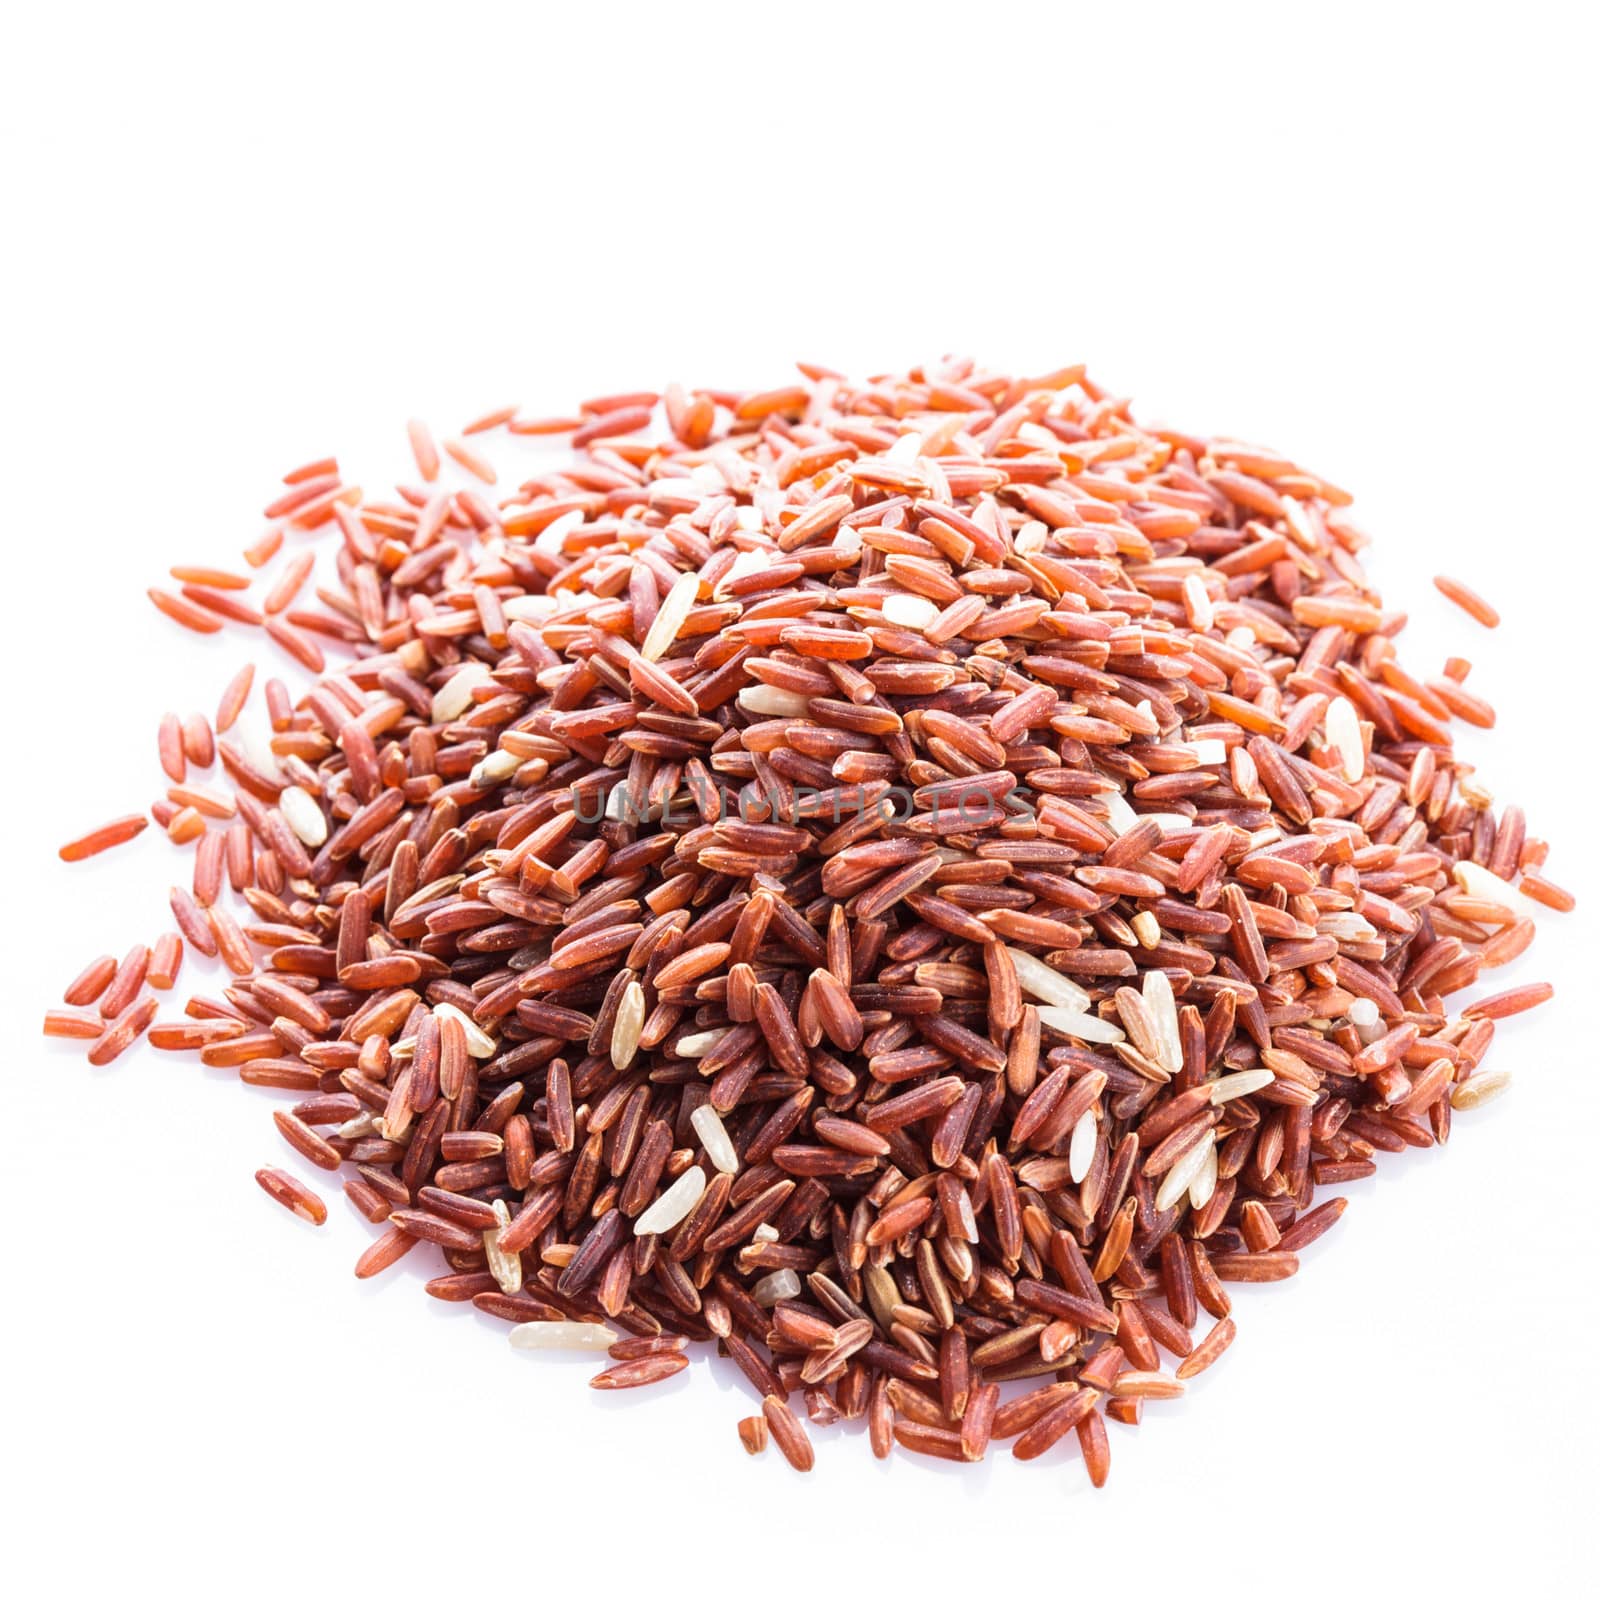 Red rice heap isolated on a white background